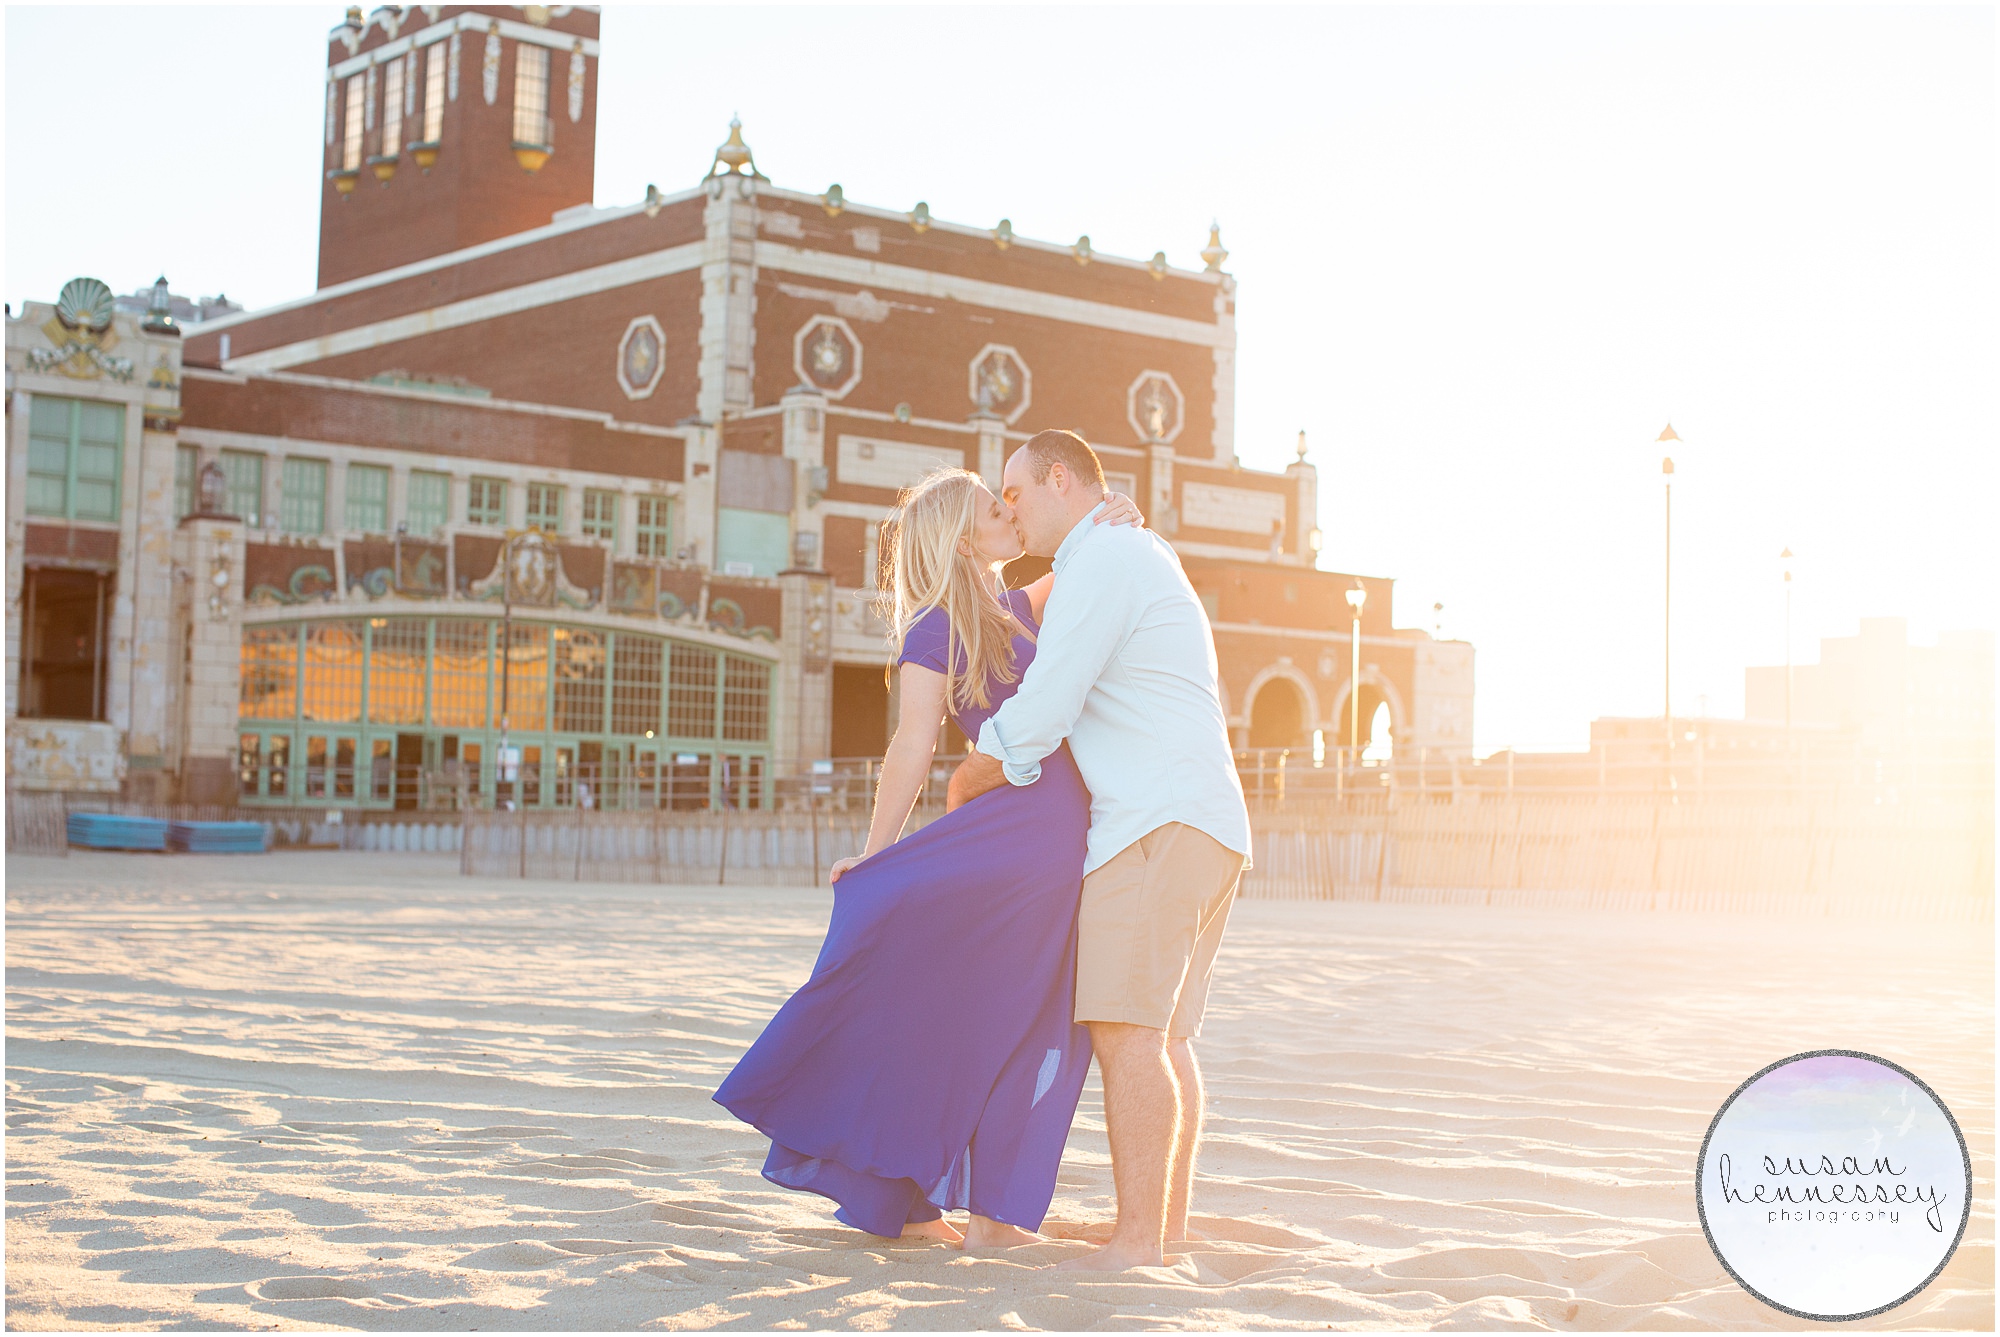 Engagement Session at Asbury Park during golden hour